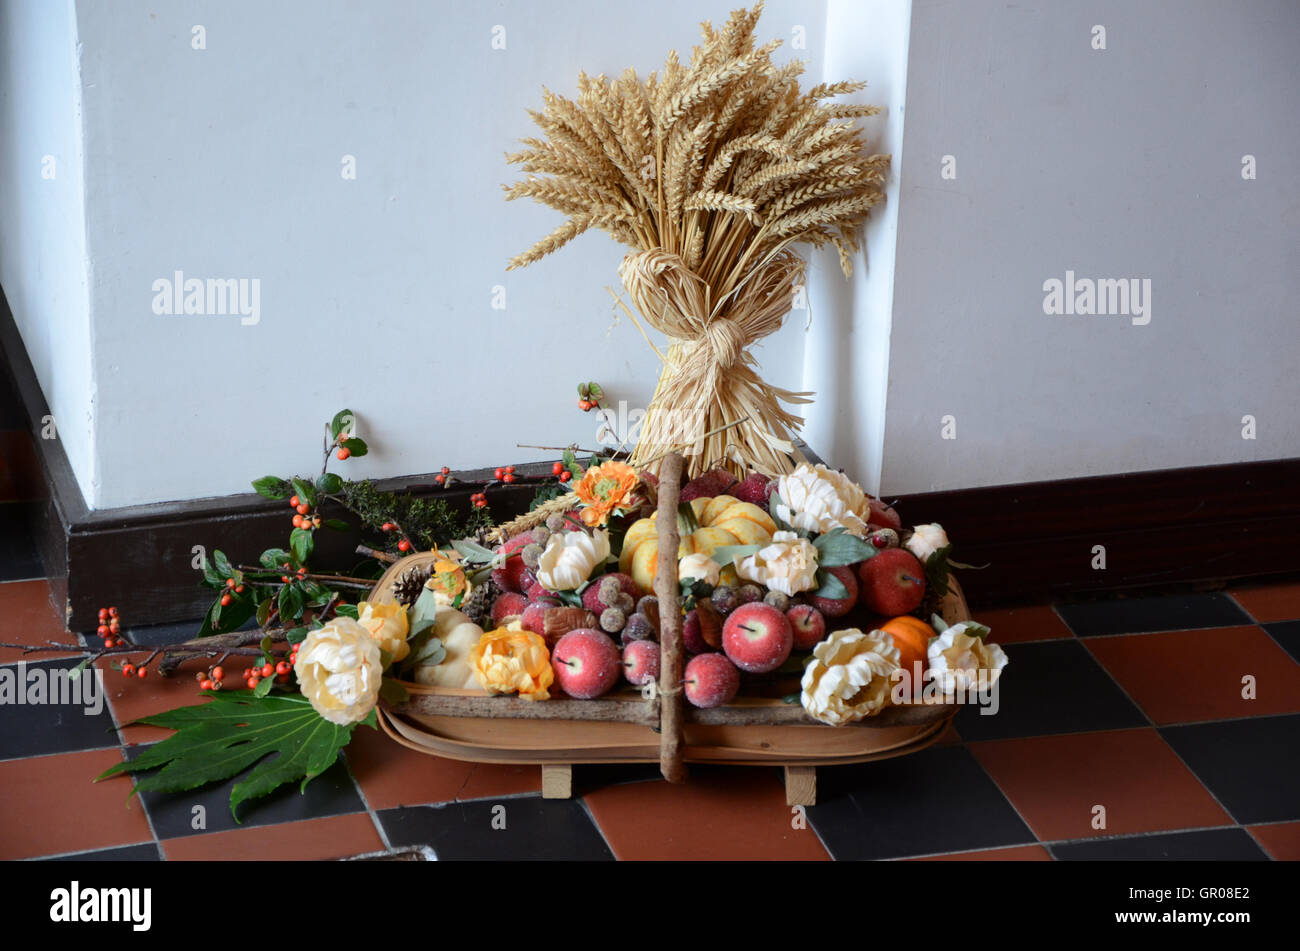 Portrush , Northern Ireland - October 20th, 2013. Picture shows a  Church Harvest decoration containing flowers fruits and wheat Stock Photo